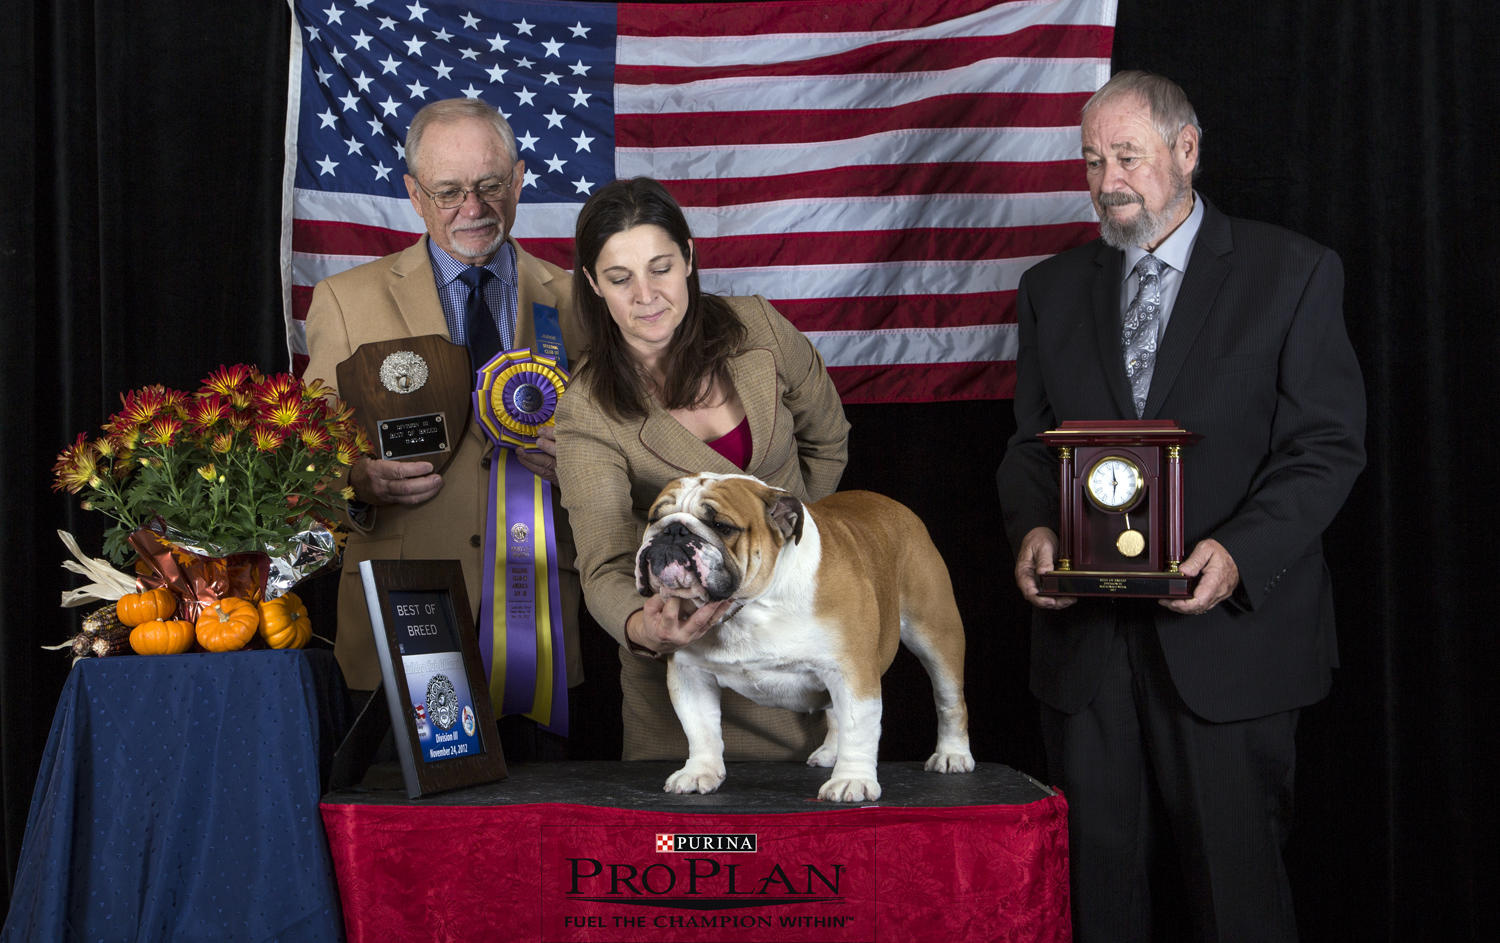 2012 National Specialty week
2nd of 2 Best In Specialty wins over the National week
Breeder Judge Mr. Michael Staley